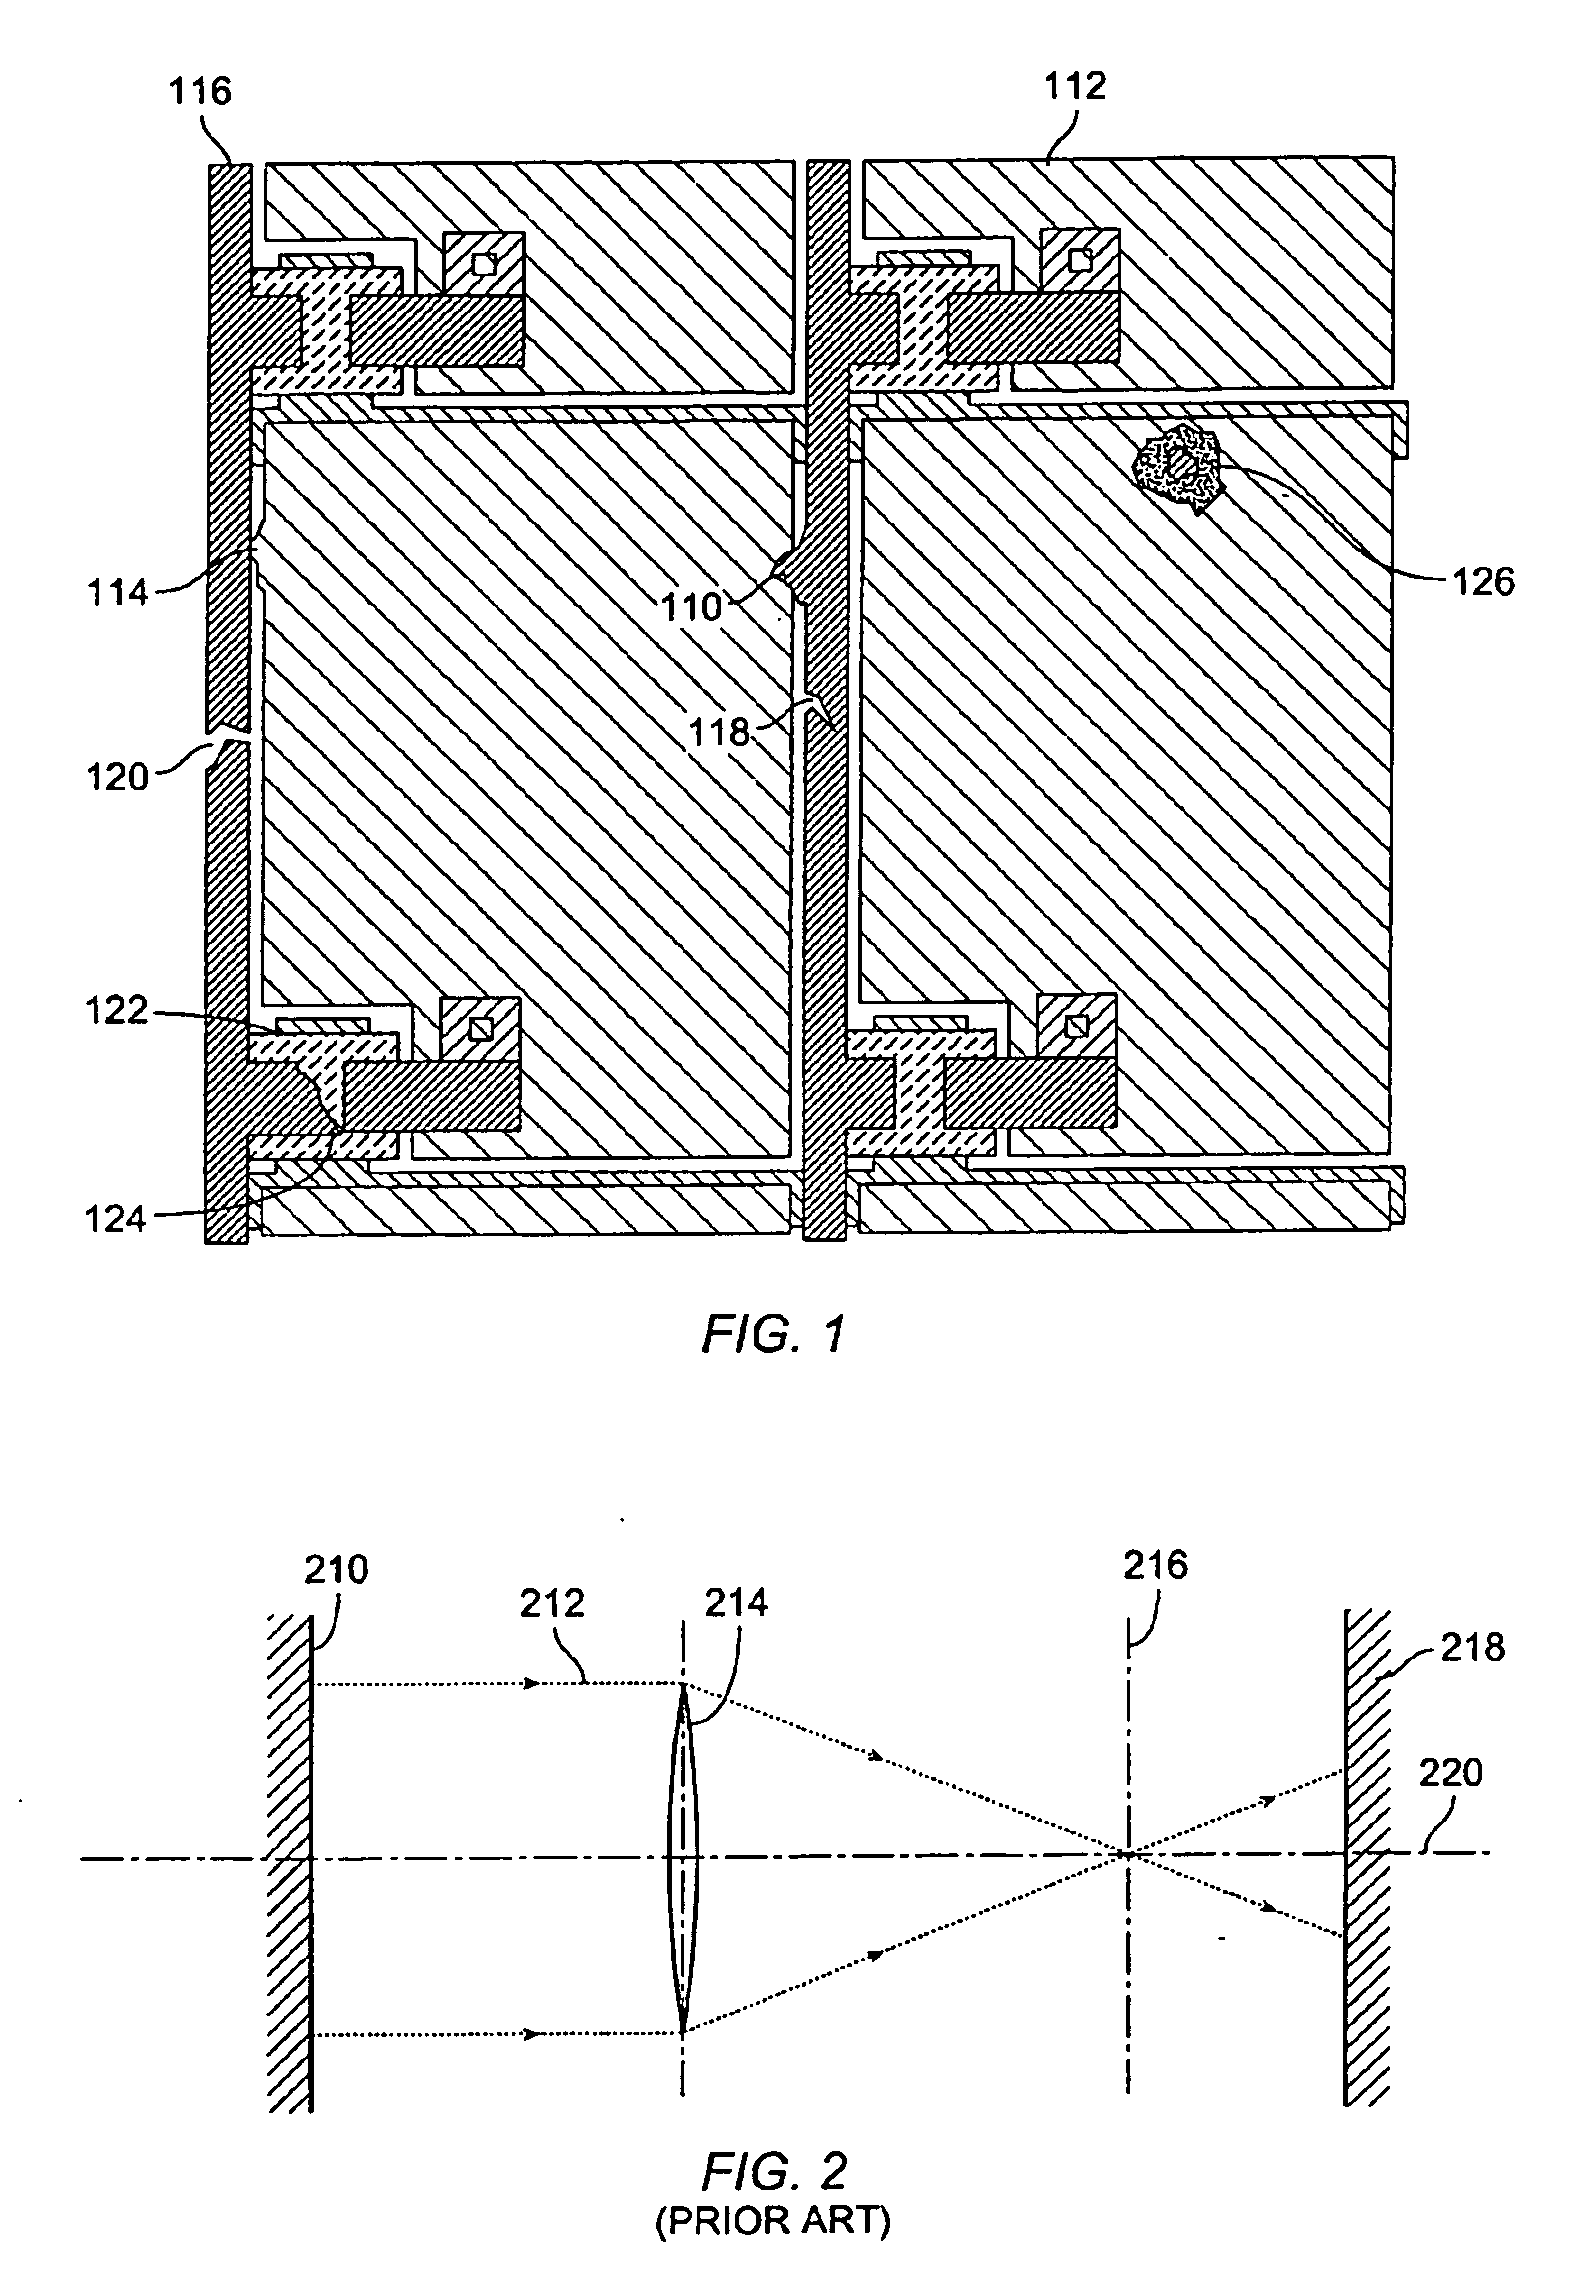 Method and apparatus for high-throughput inspection of large flat patterned media using dynamically programmable optical spatial filtering